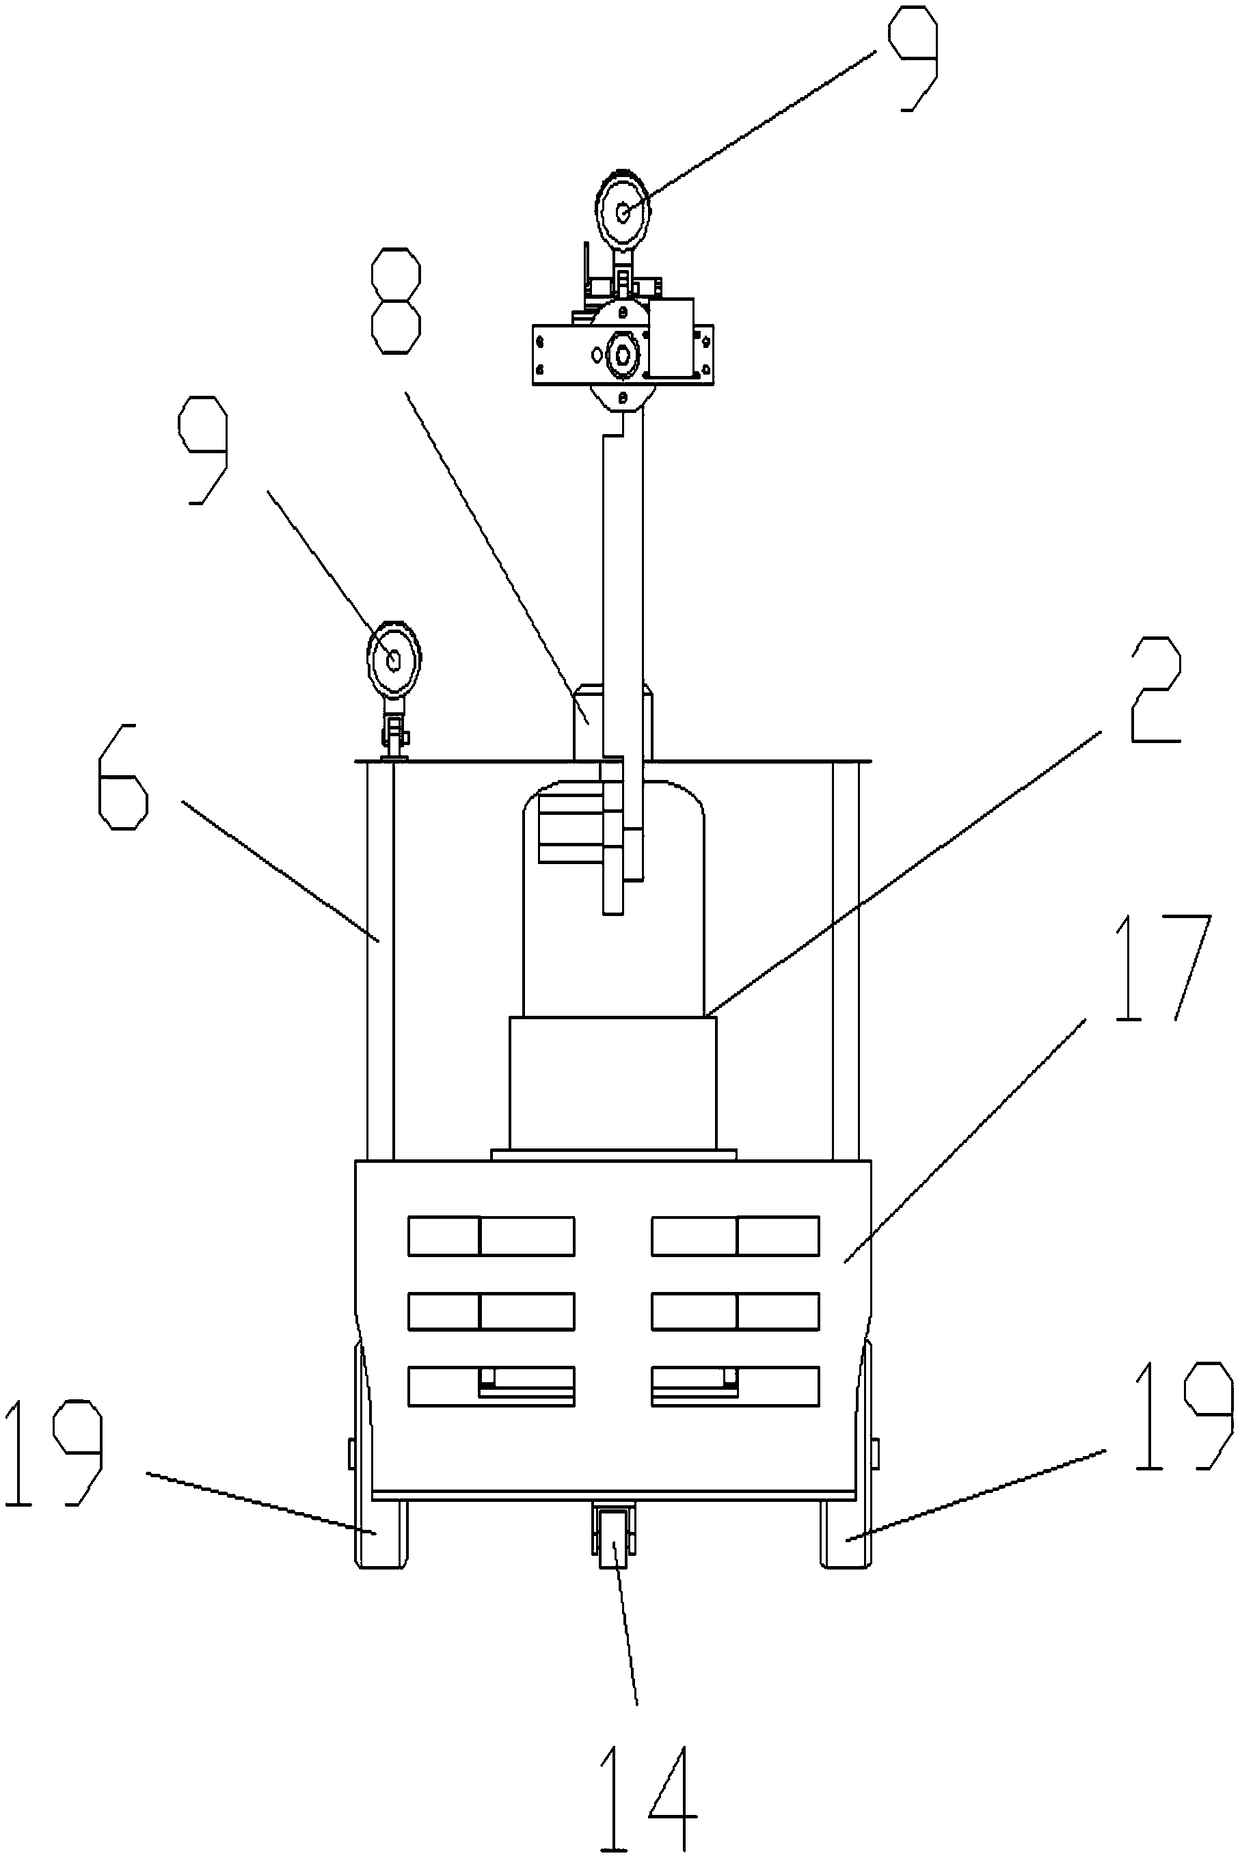 Intelligent-manufacturing-field-oriented mobile machine tool fault diagnosis robot